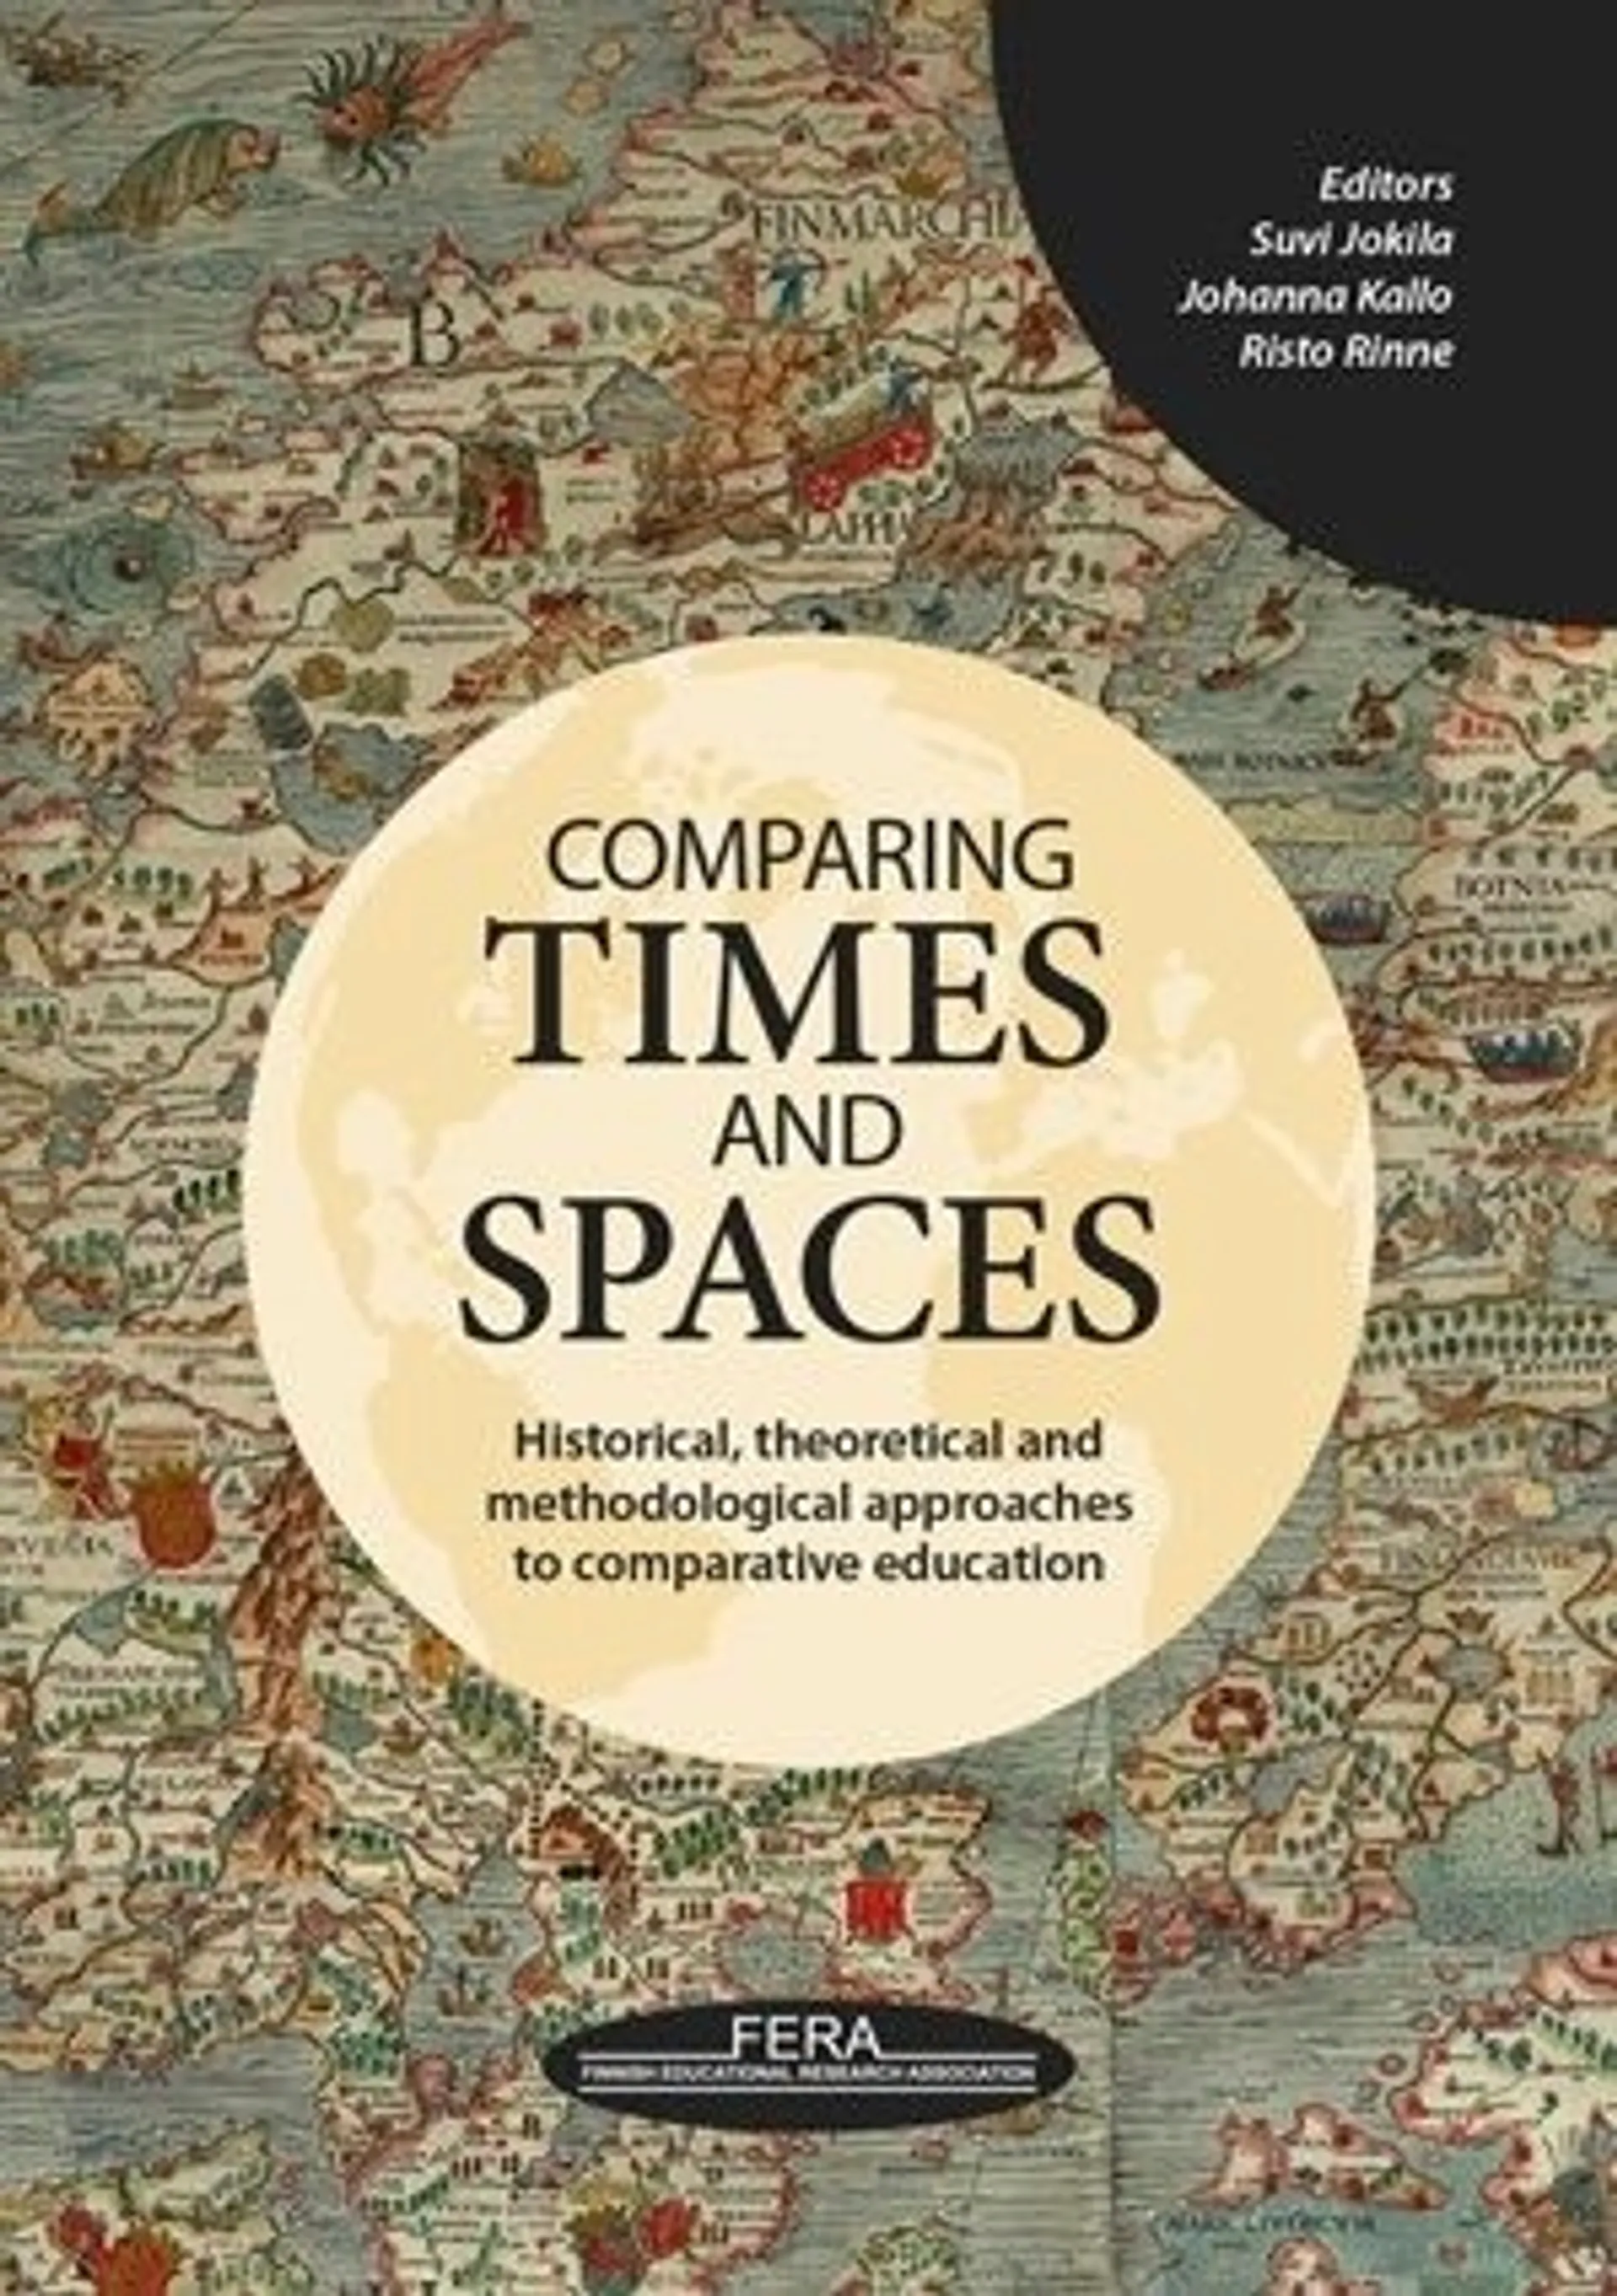 Comparing times and spaces - Historical, theoretical and methodological approaches to comparative education